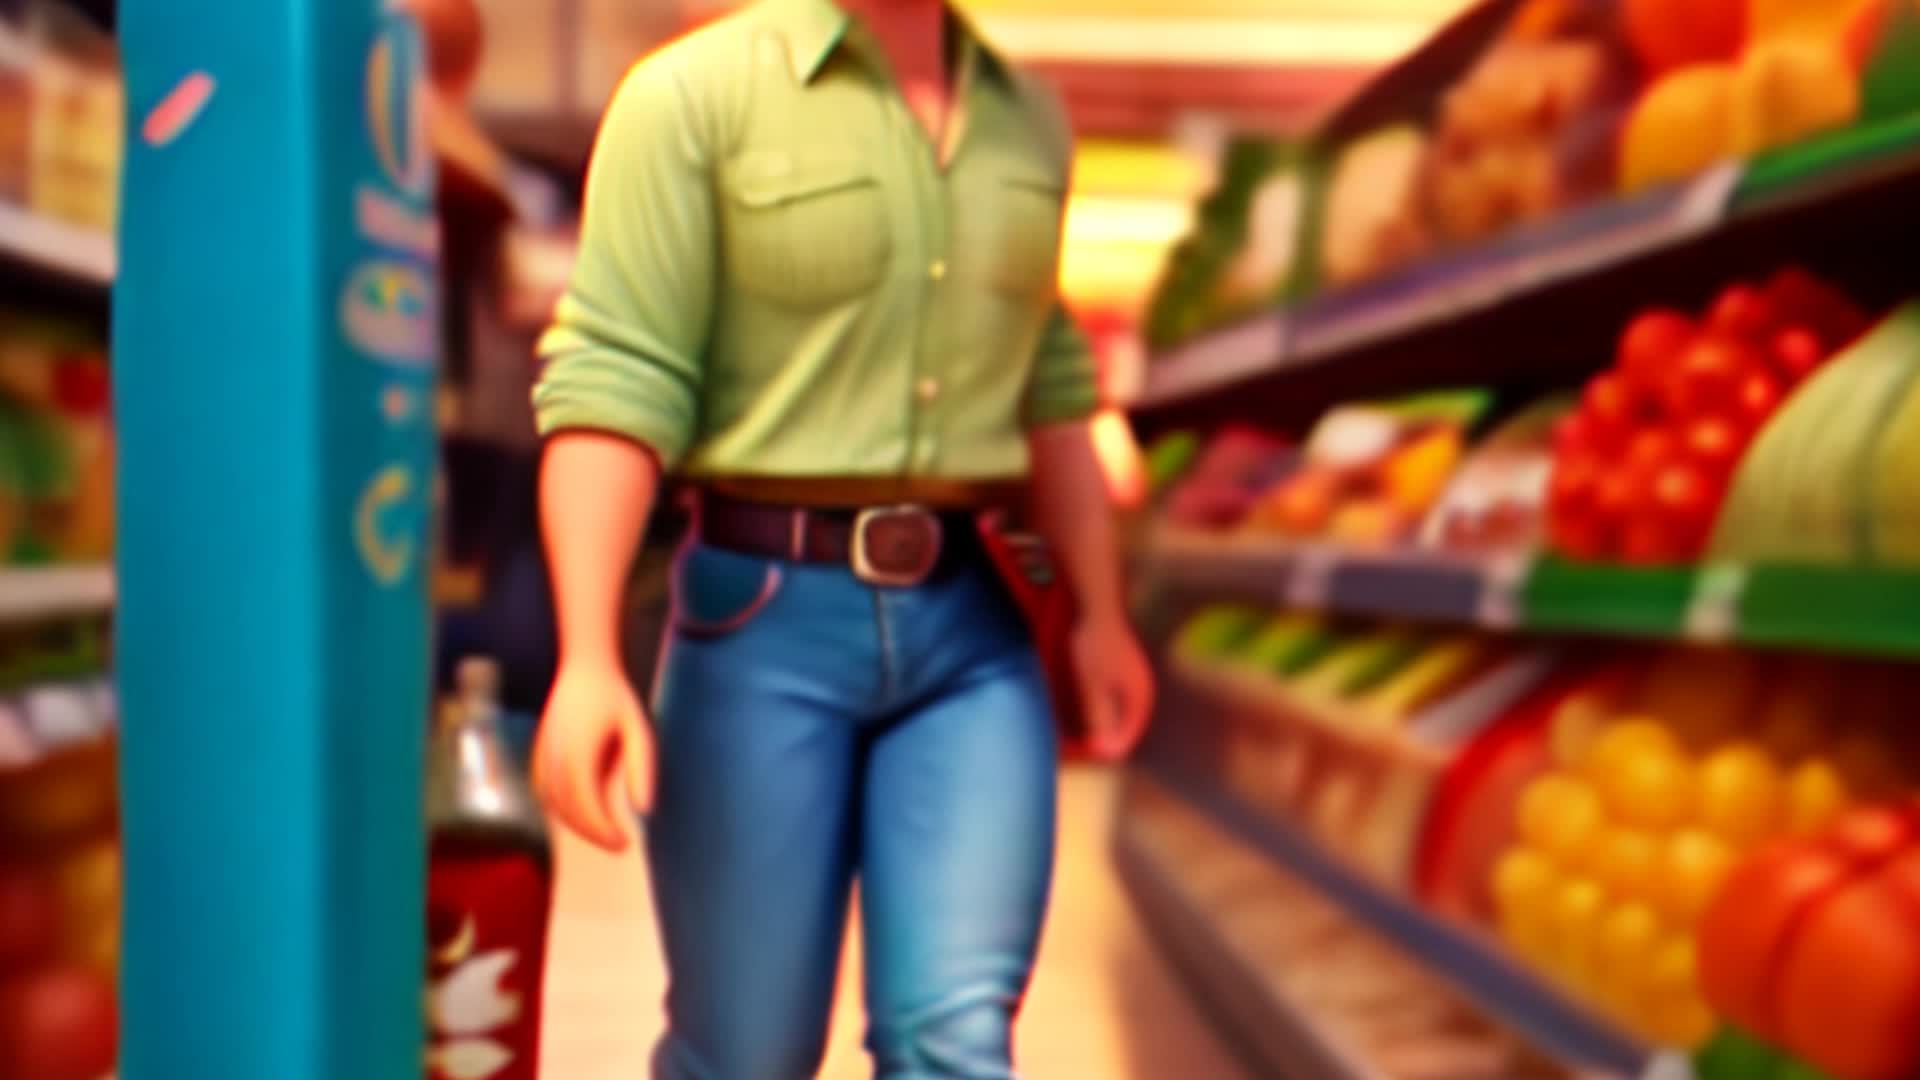 Man in silk shirt, cowboy boots, smiling intriguingly at woman, grocery aisle background, bright, vivid colors, full body shot